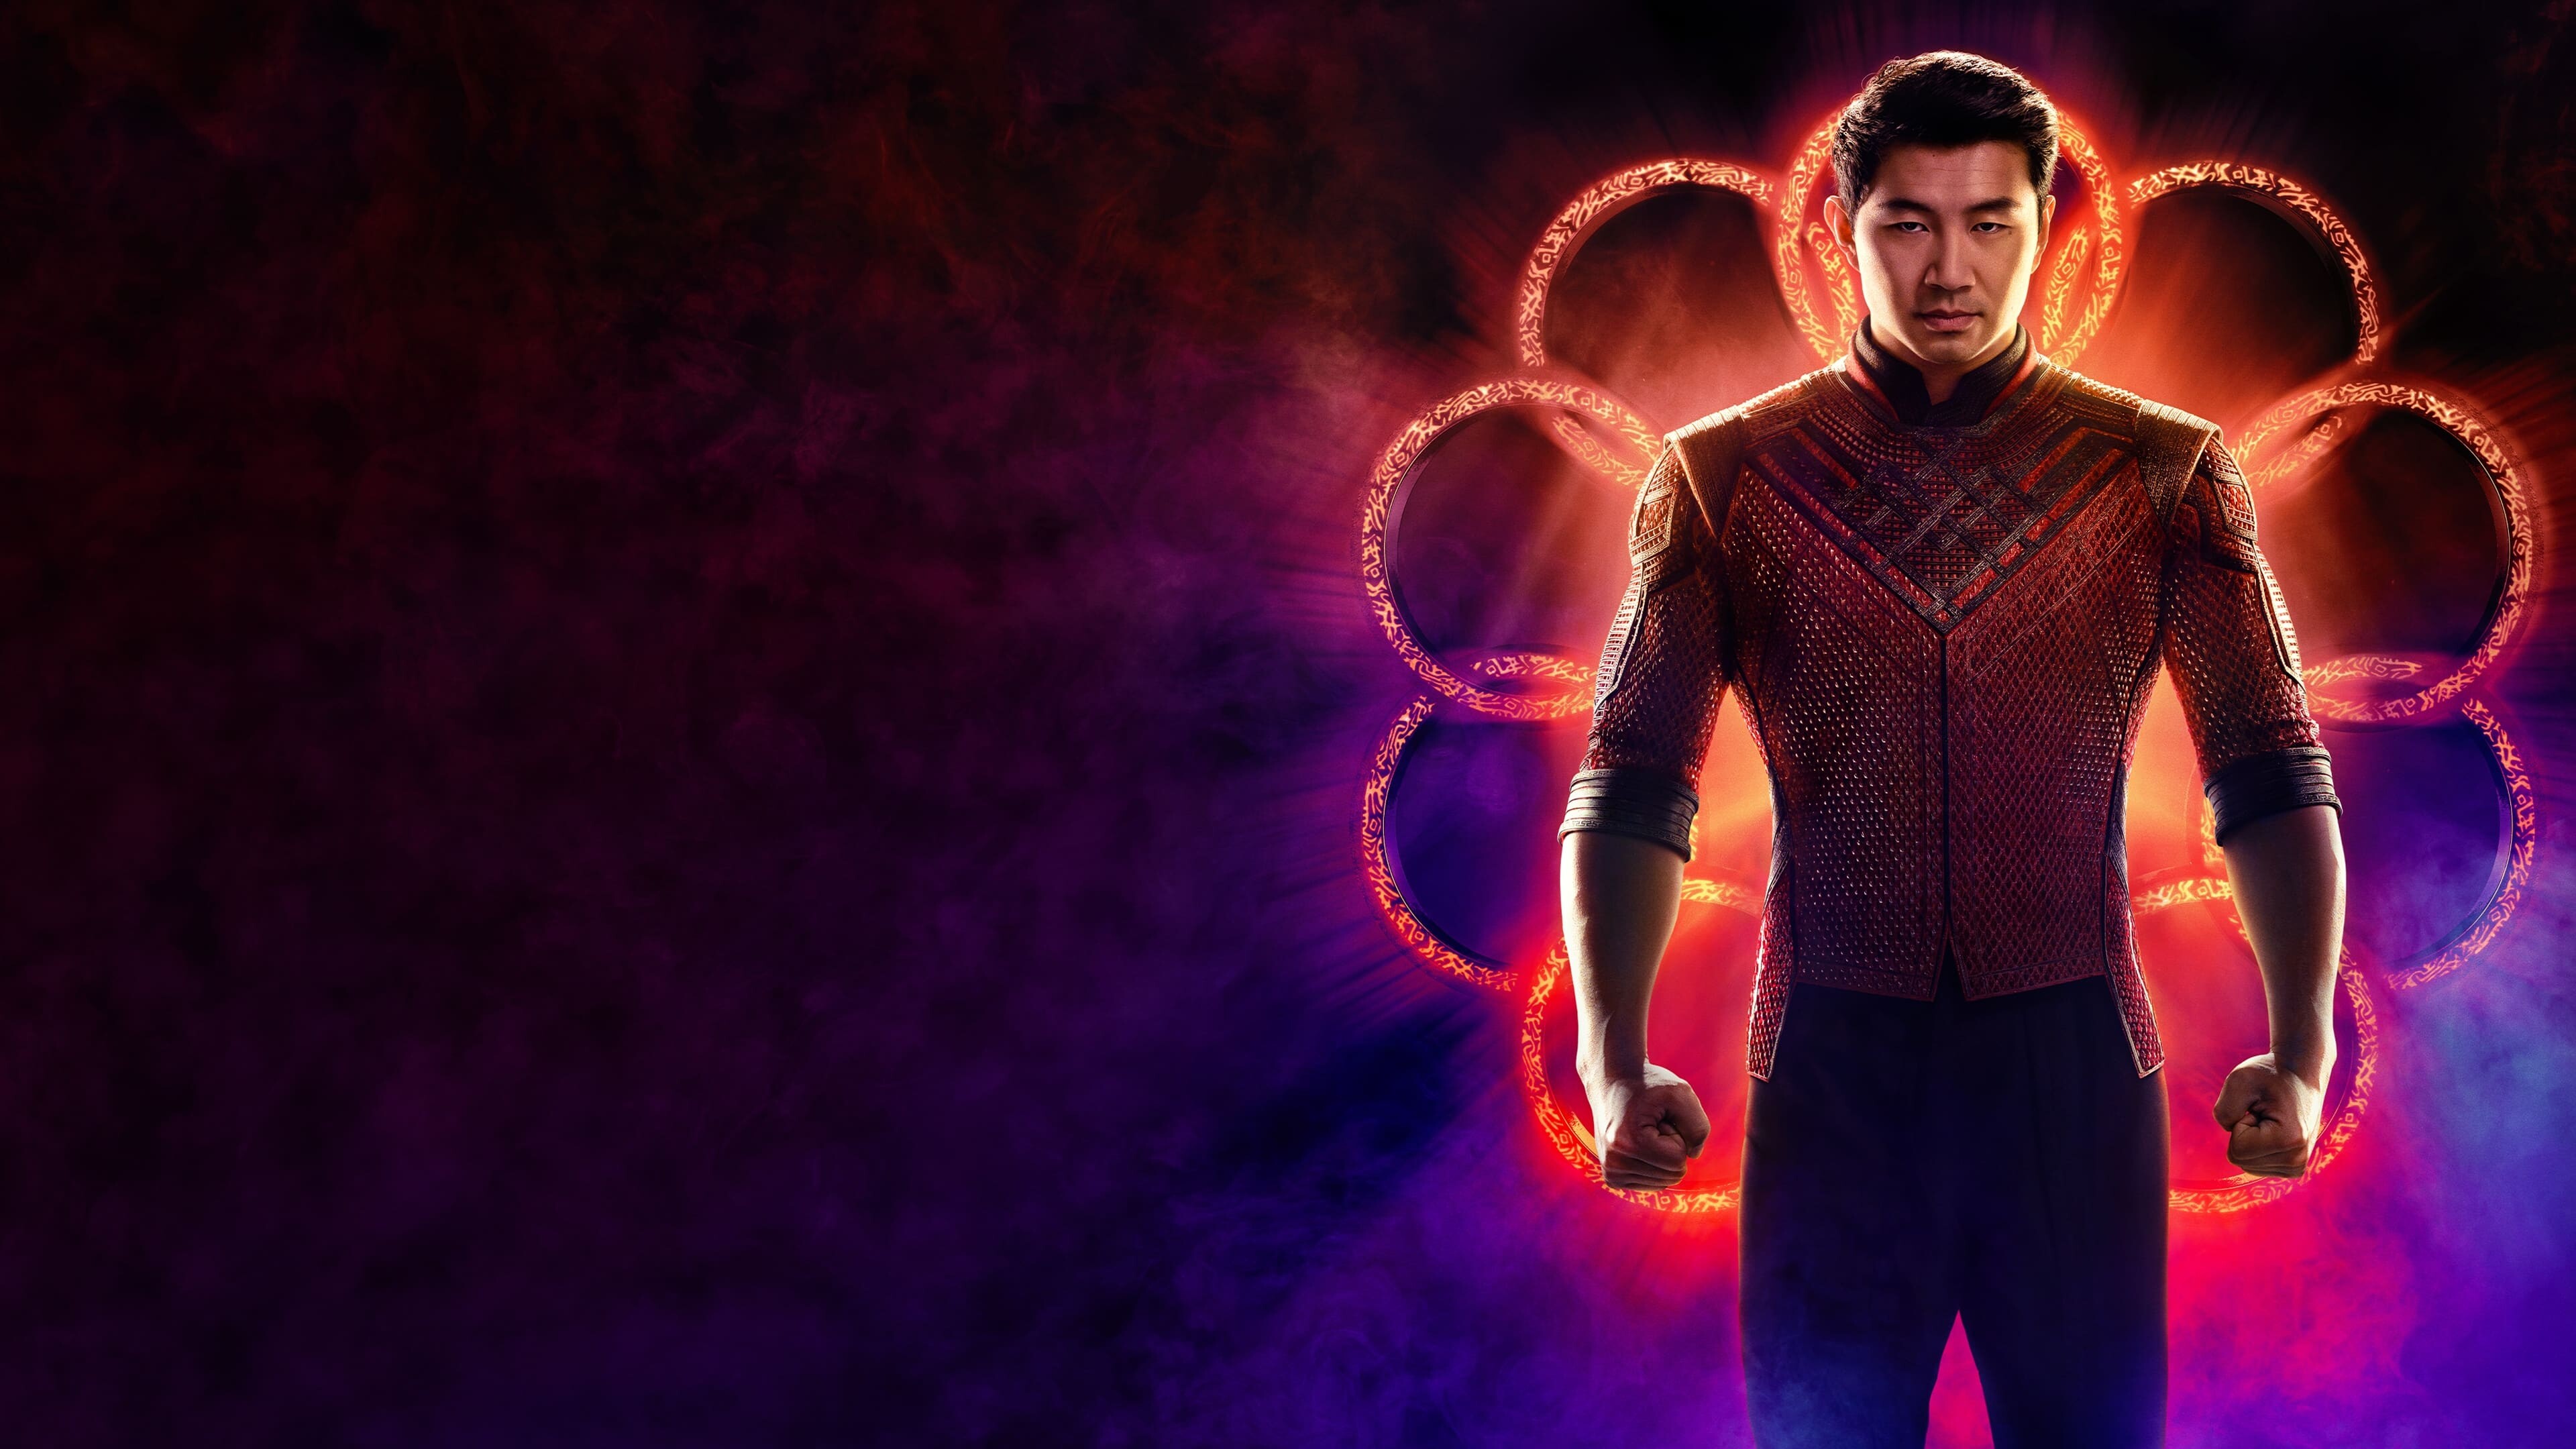 Shang-Chi and the Legend of the Ten Rings: Produced by Marvel Studios and distributed by Walt Disney Studios Motion Pictures. 3840x2160 4K Wallpaper.